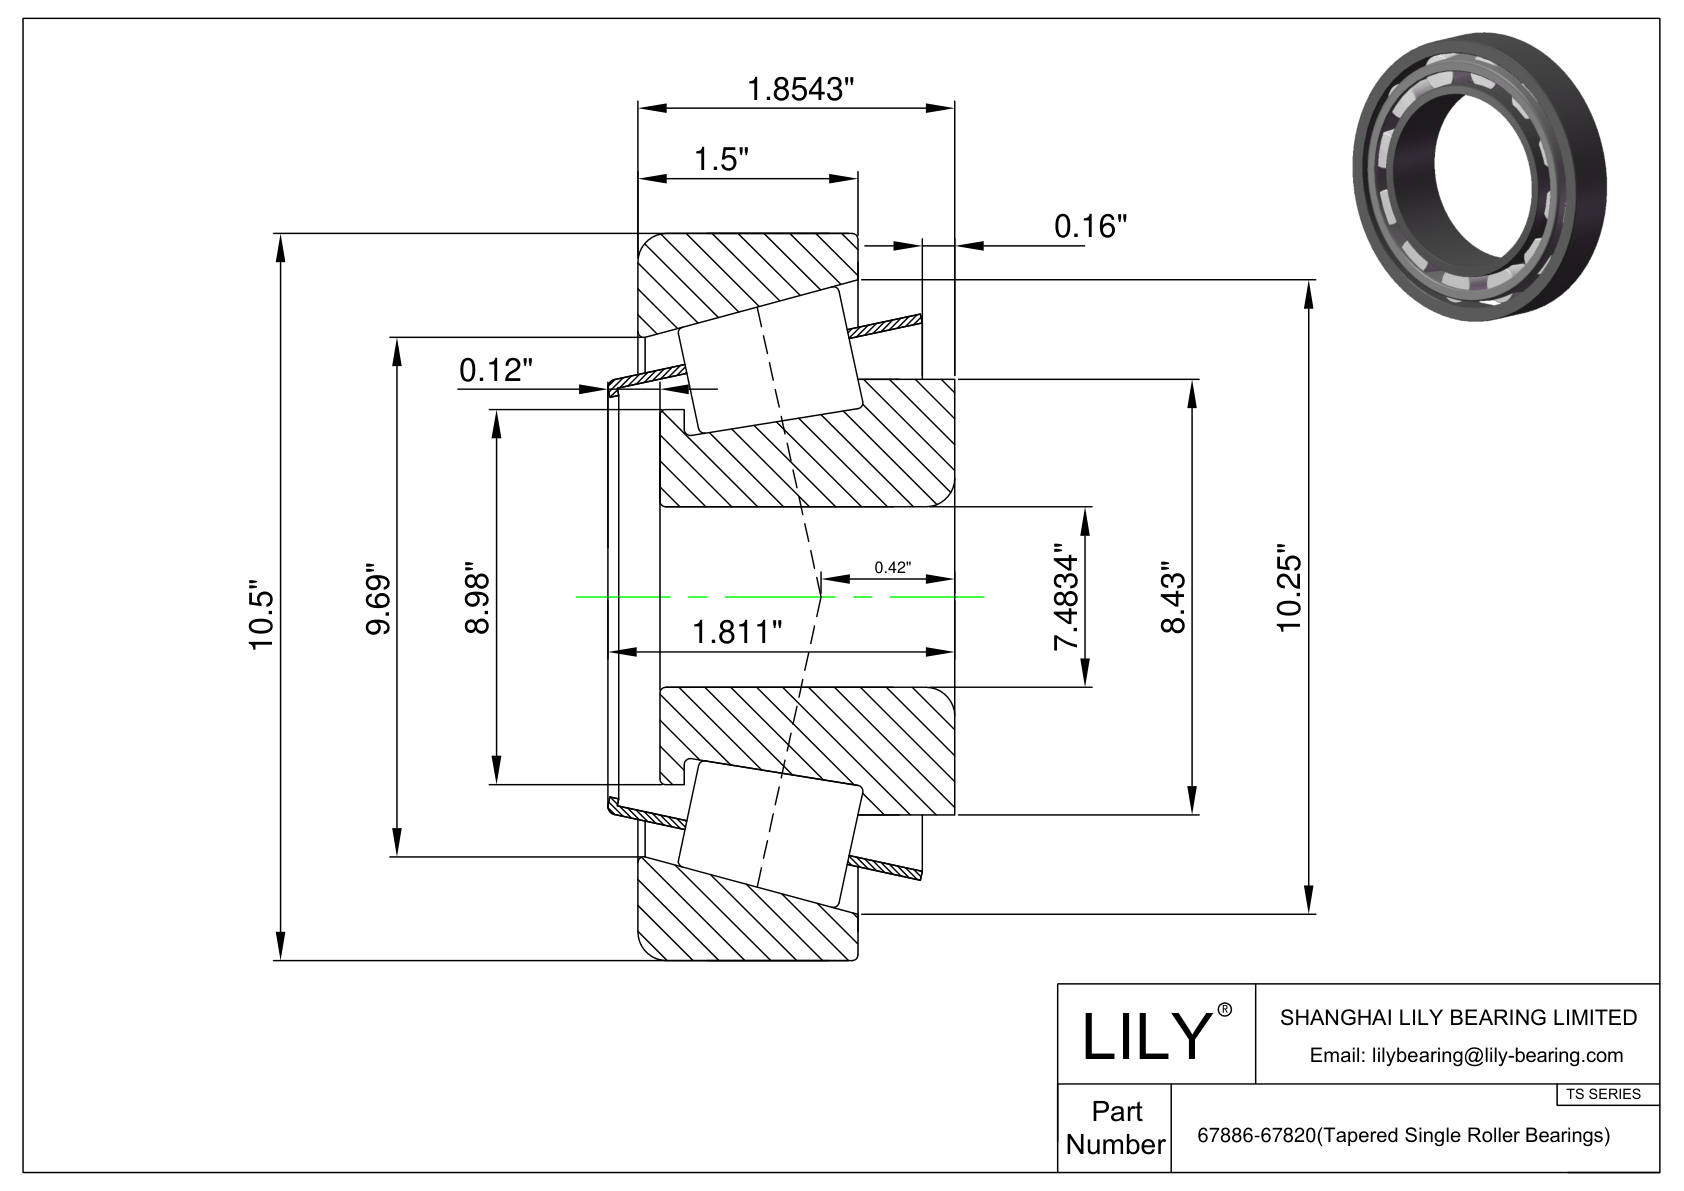 67886-67820 TS (Tapered Single Roller Bearings) (Imperial) cad drawing